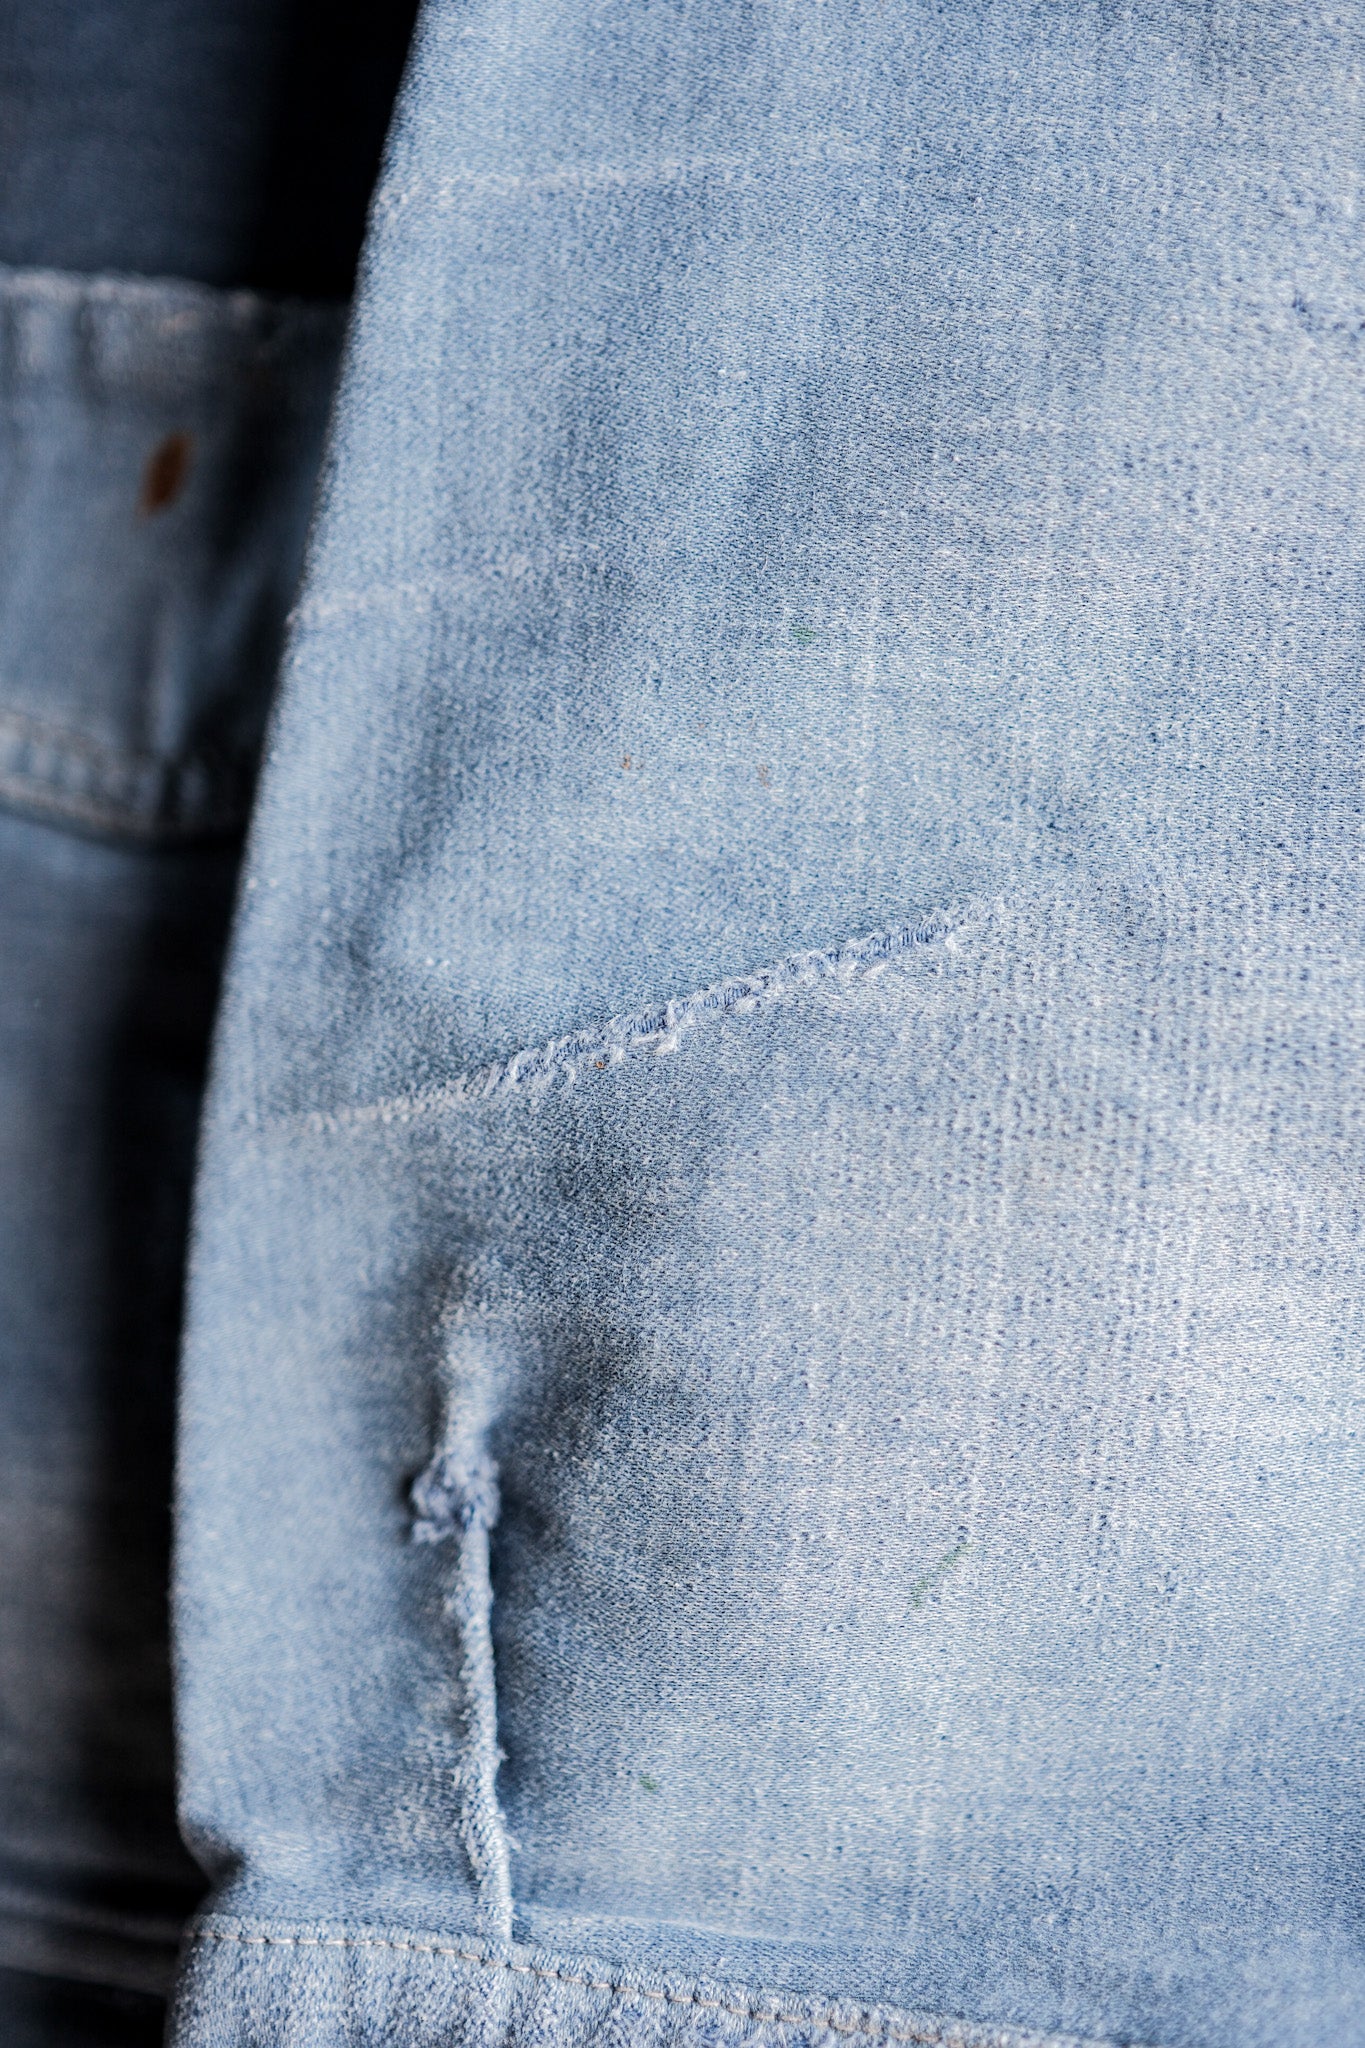 1930's Buckle Back Jeans with Peculiar Repairs The denim fades